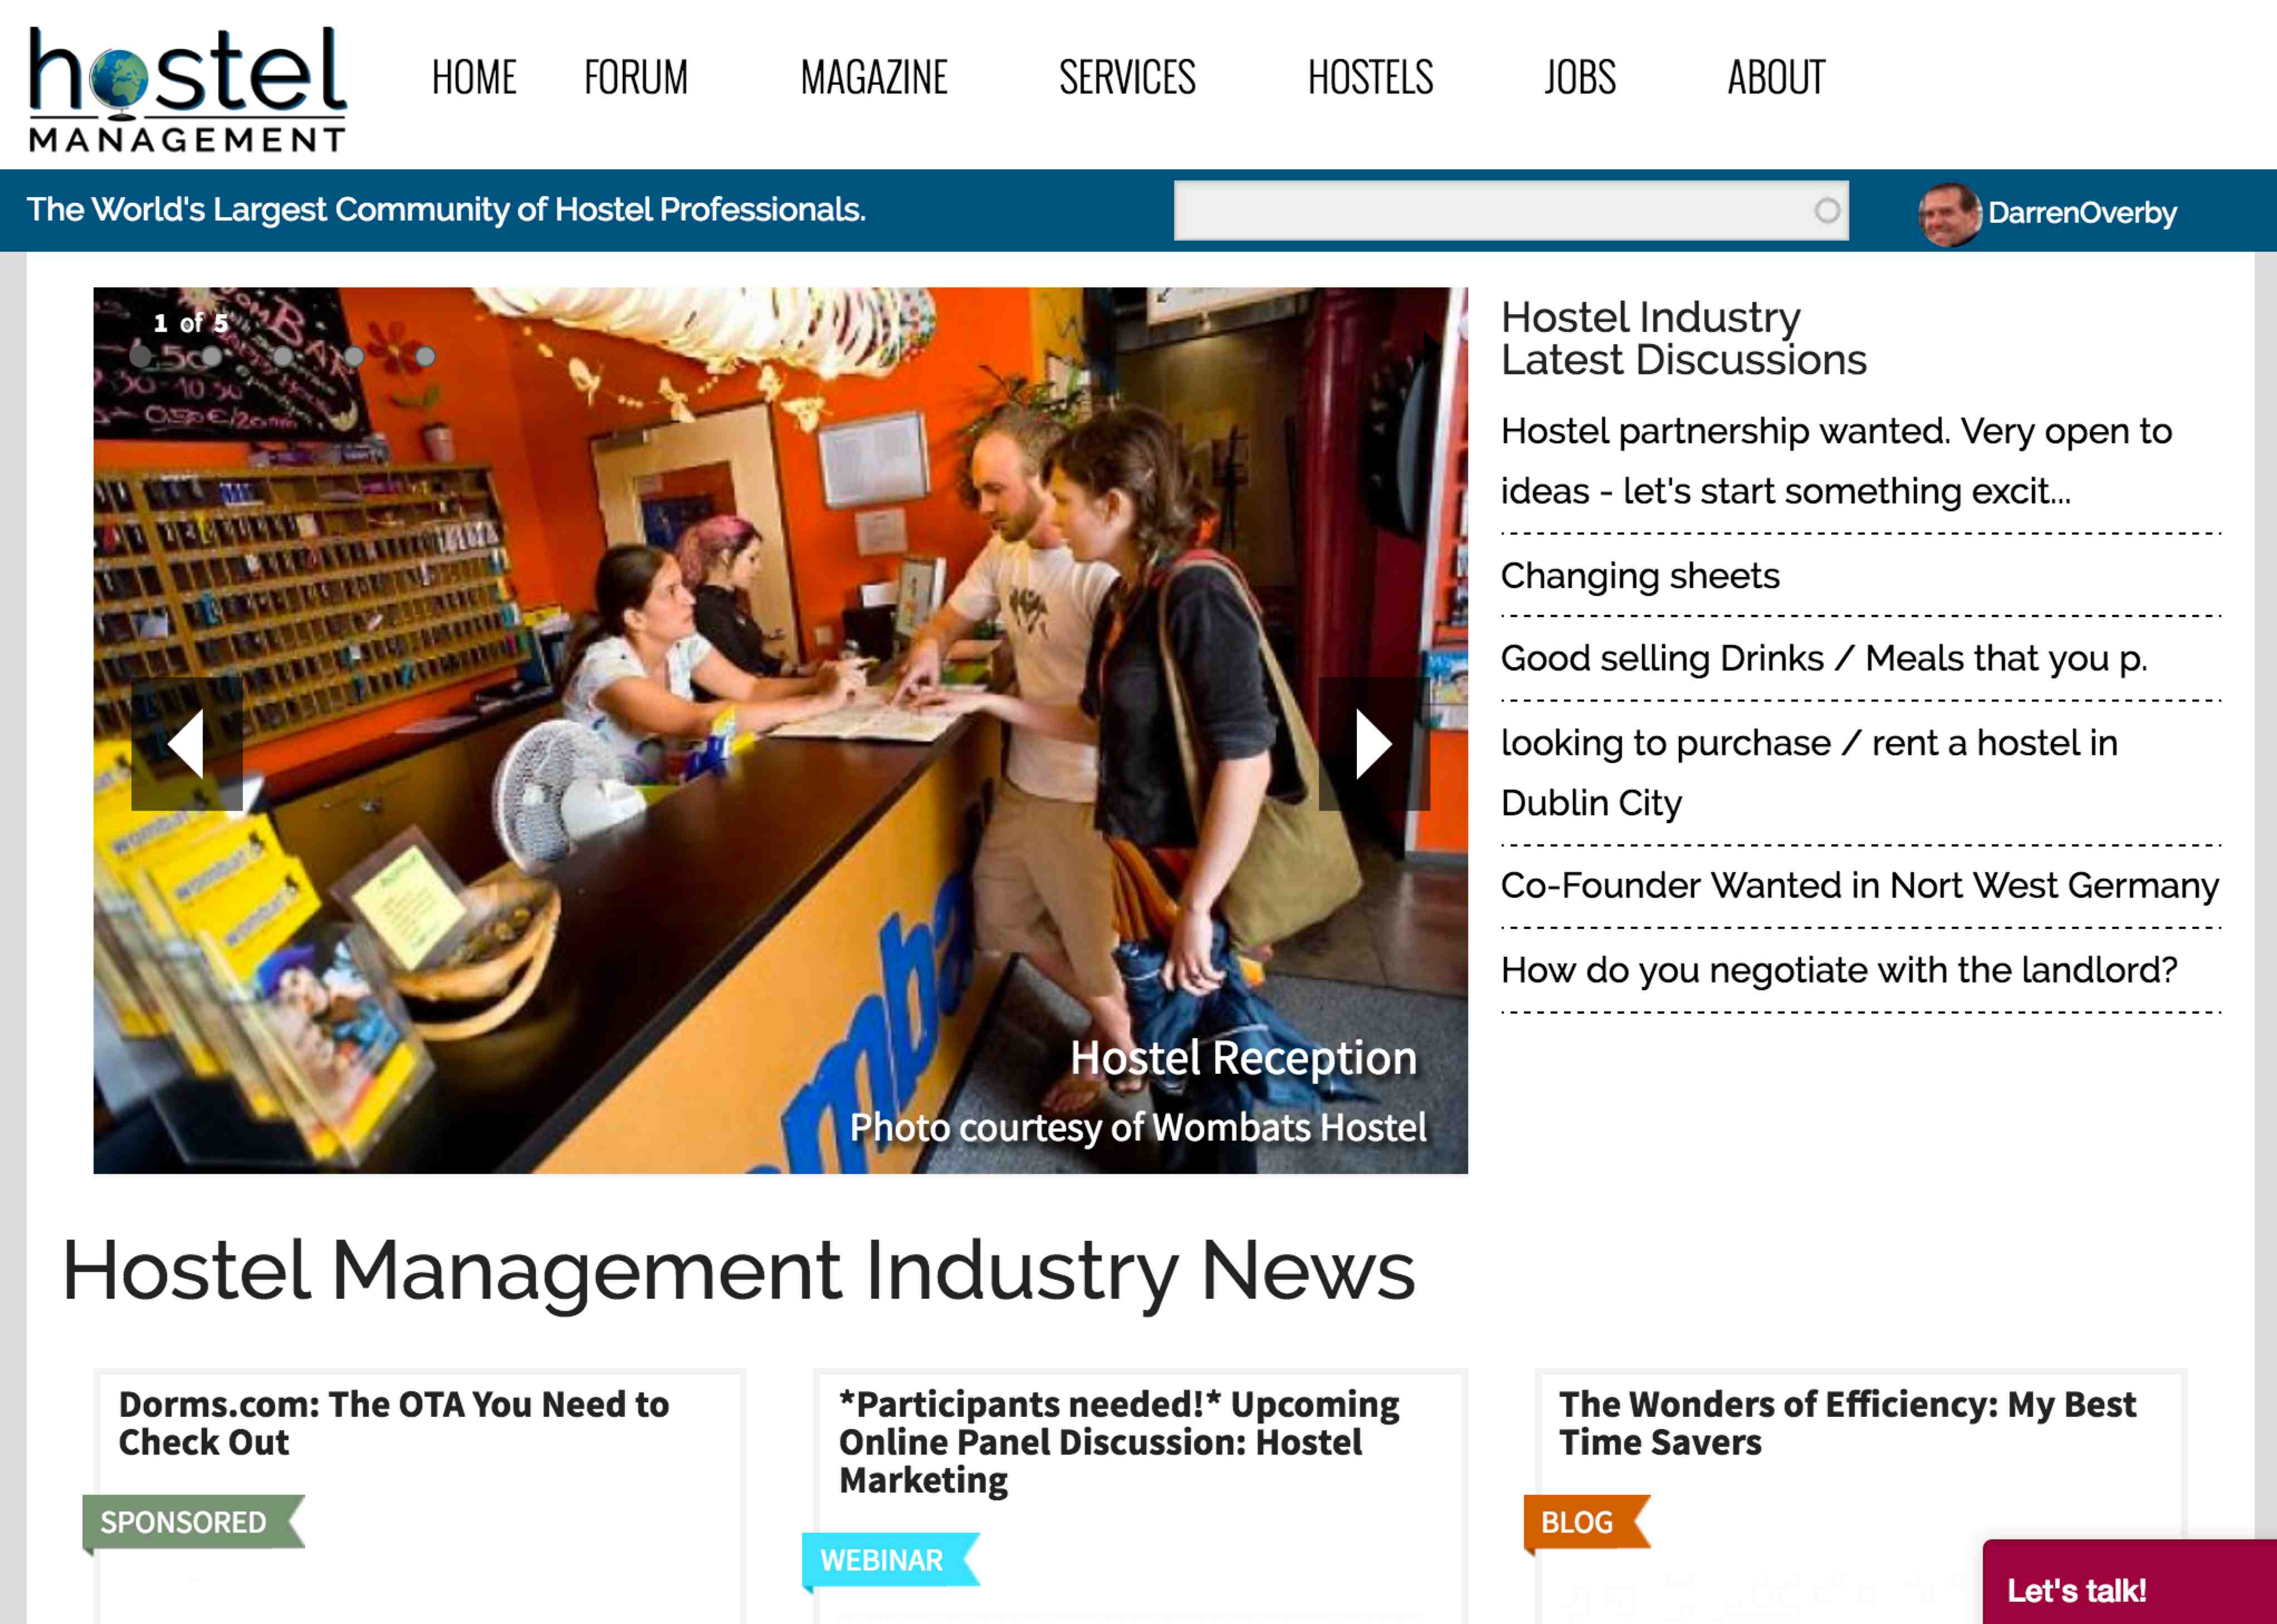 Hostel Management Home Page